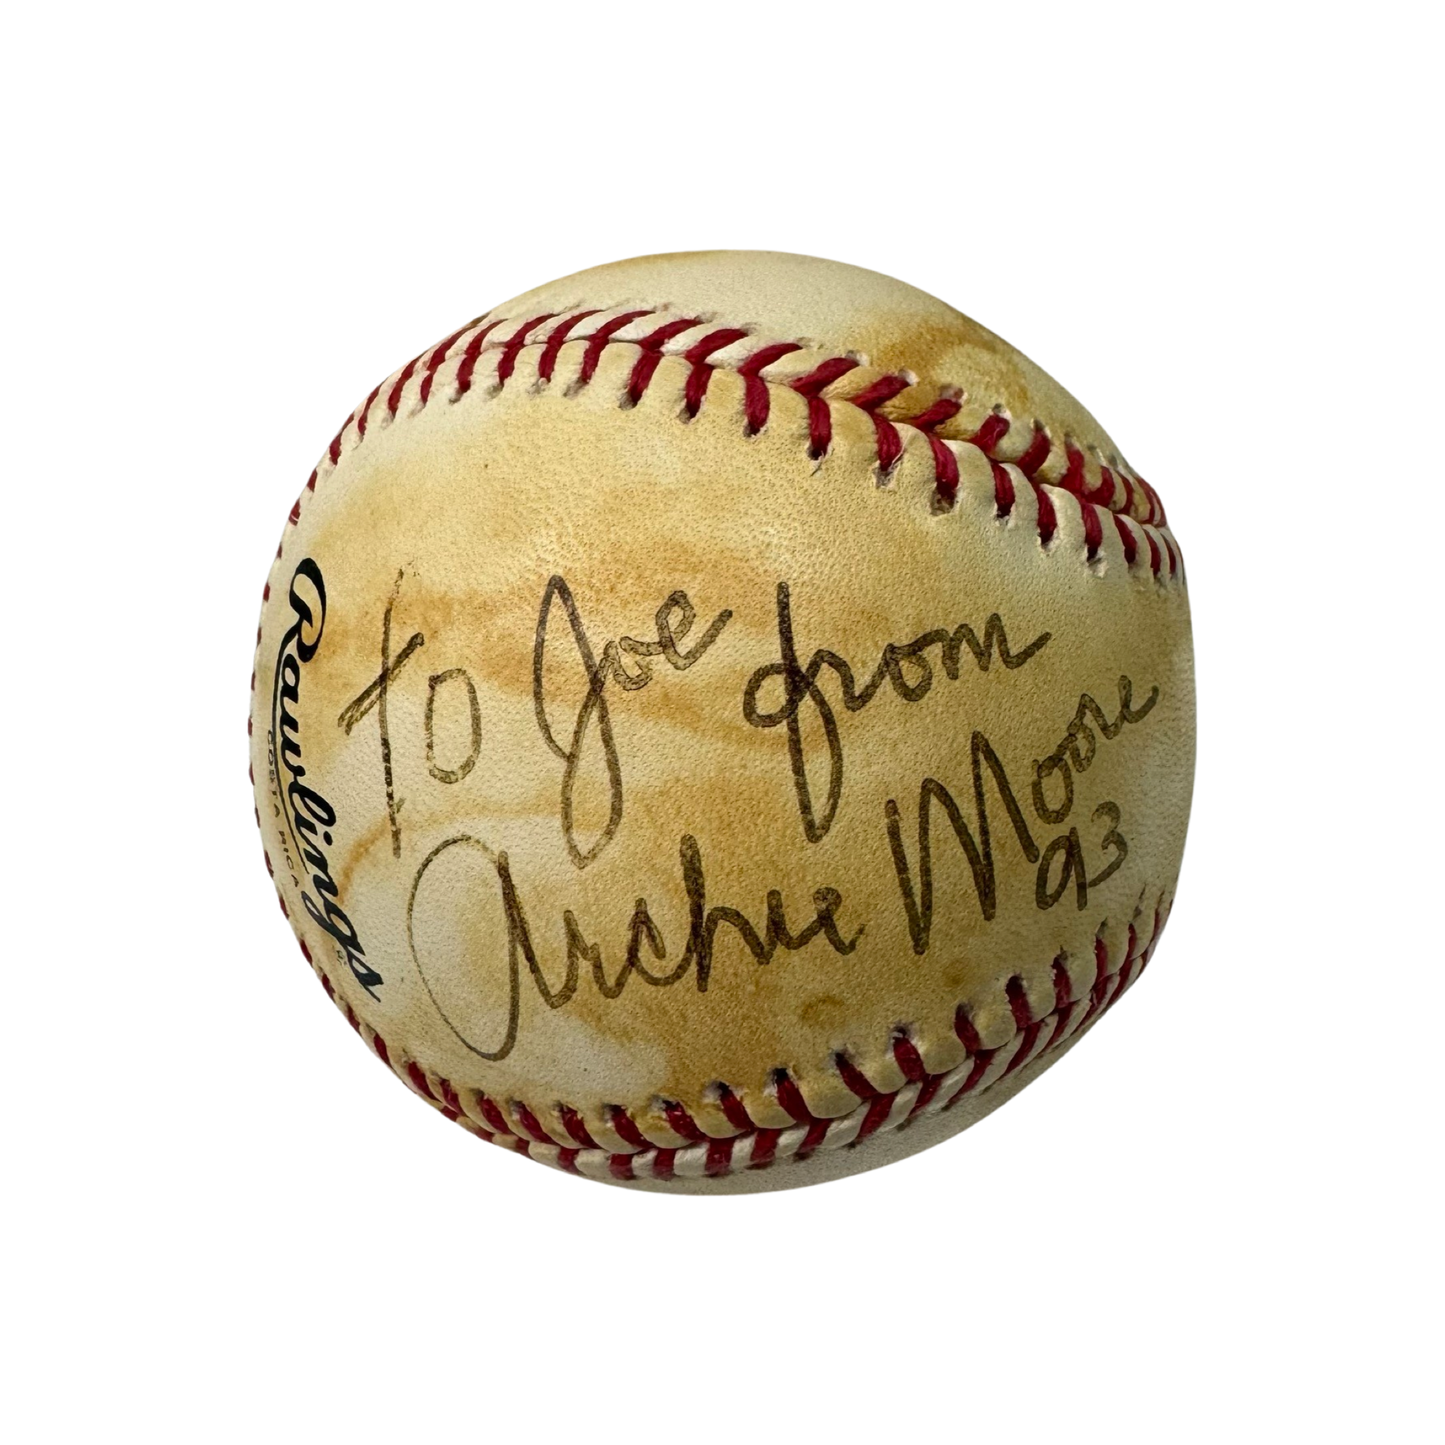 Archie Moore Autographed Official National League Baseball “To Joe From” Inscription Beckett